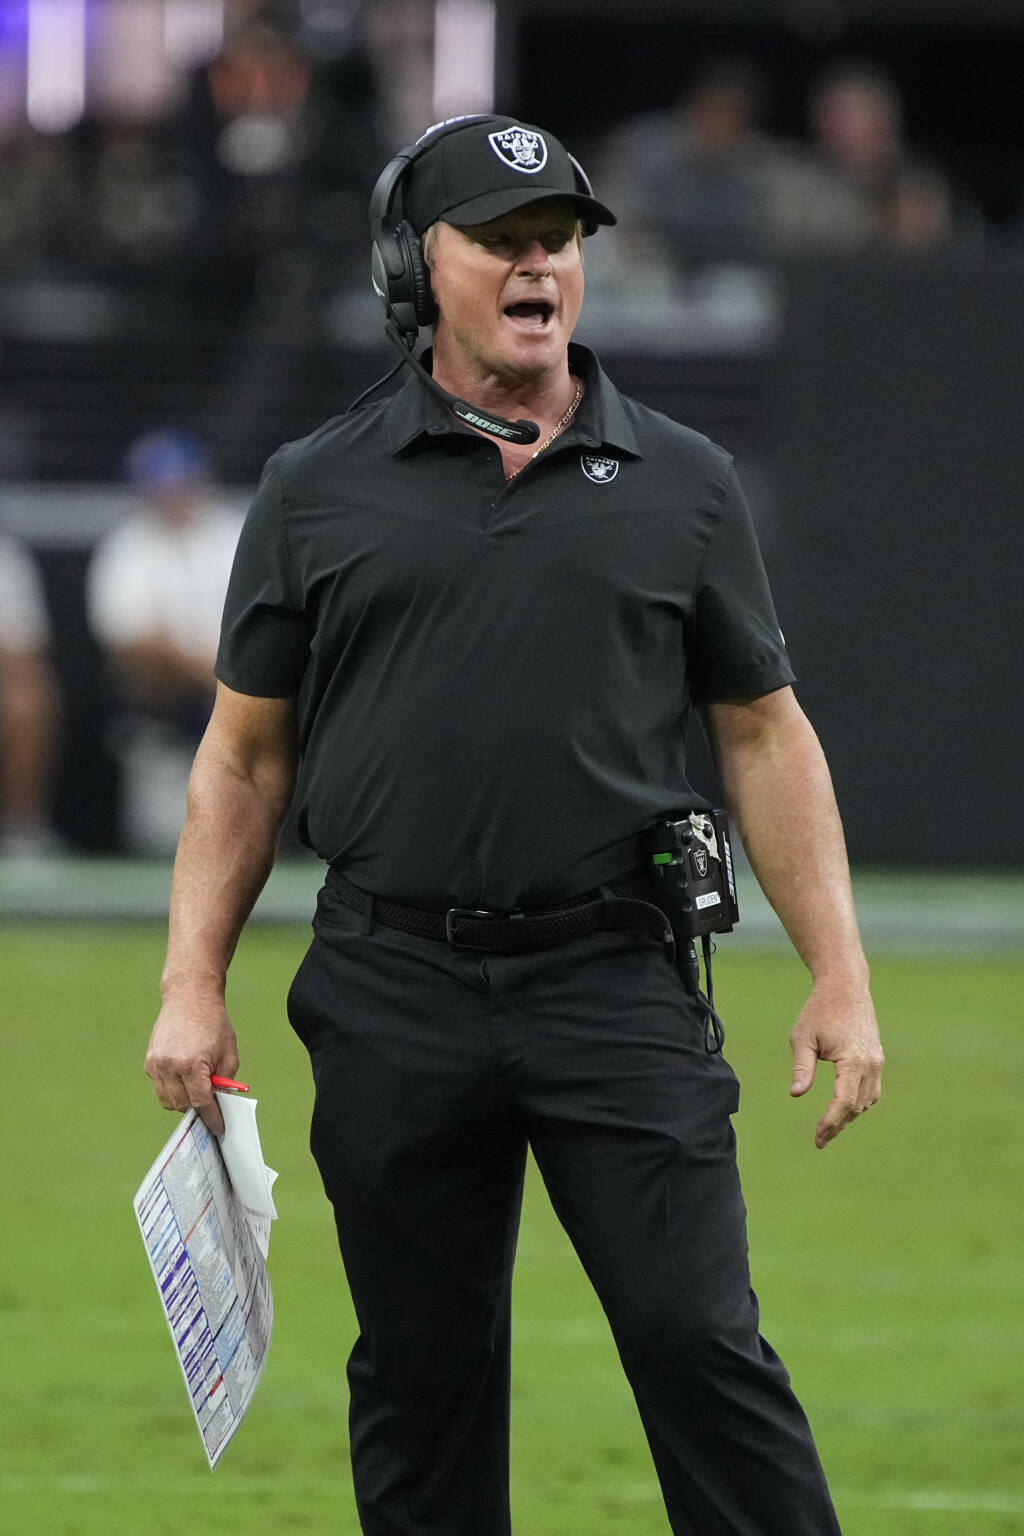 Jon Gruden out as Raiders coach over offensive emails